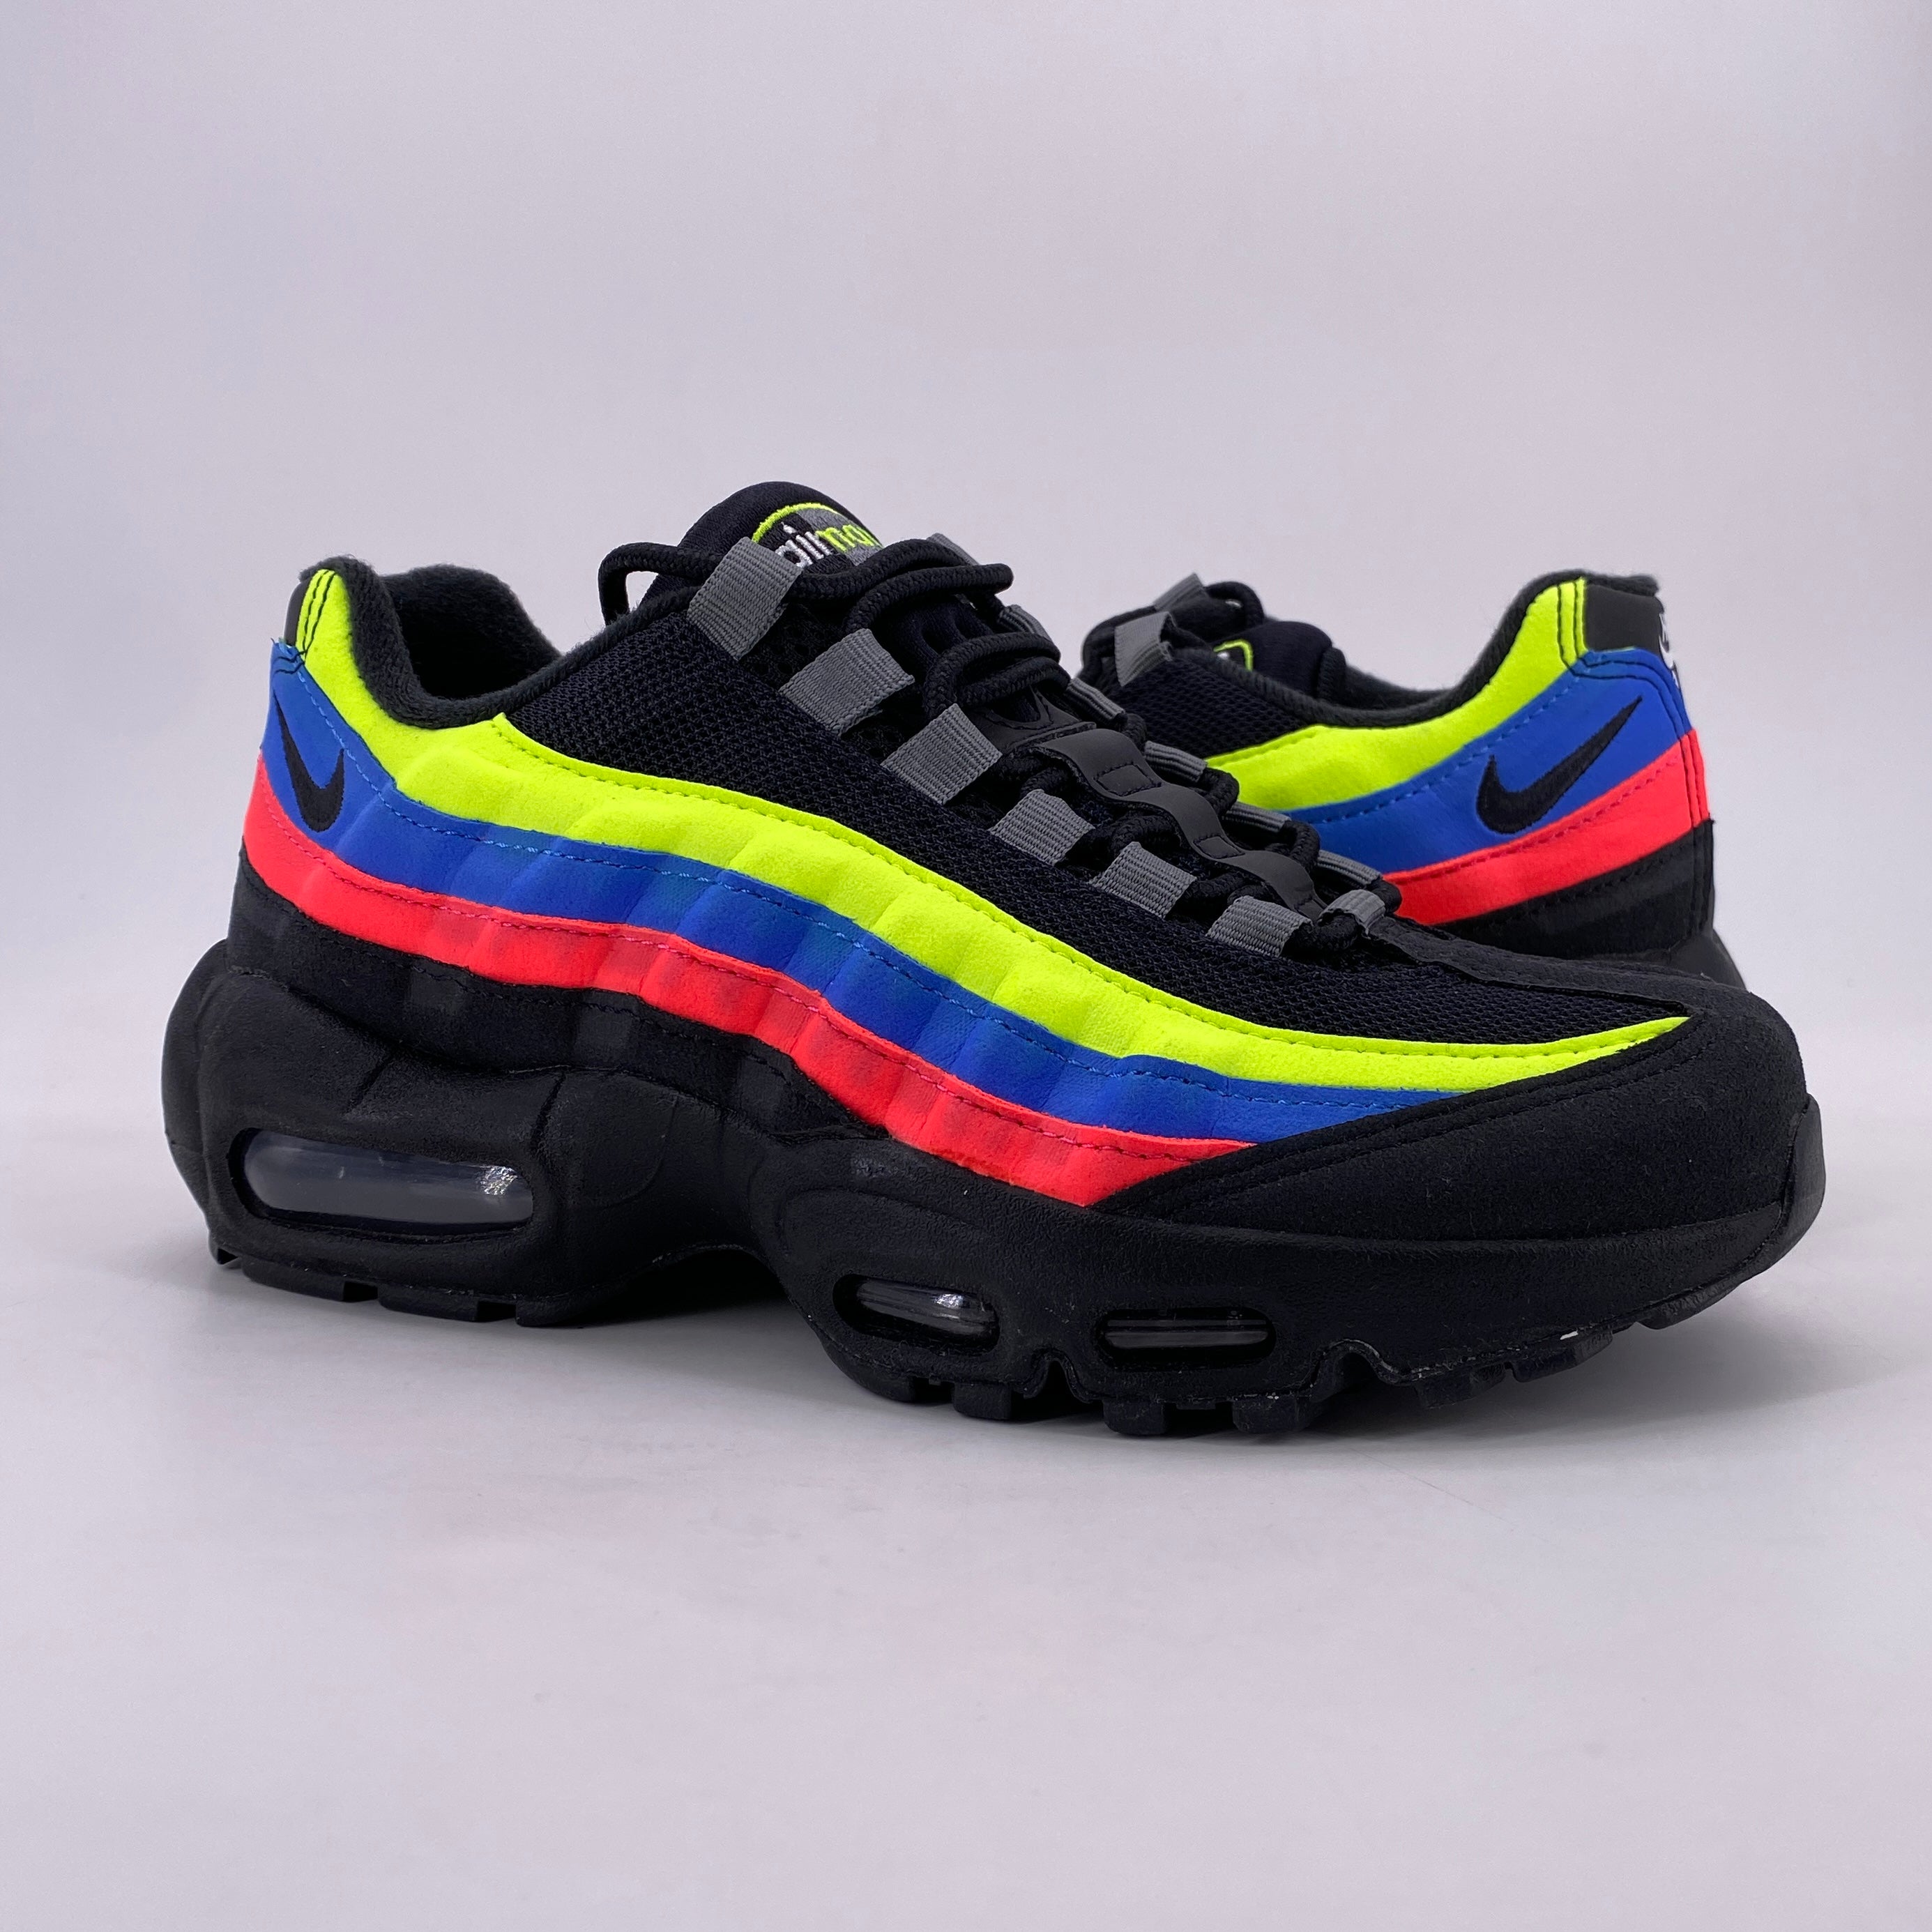 Nike (GS) Air Max 95 "Black Neon" 2022 New Size 5.5Y